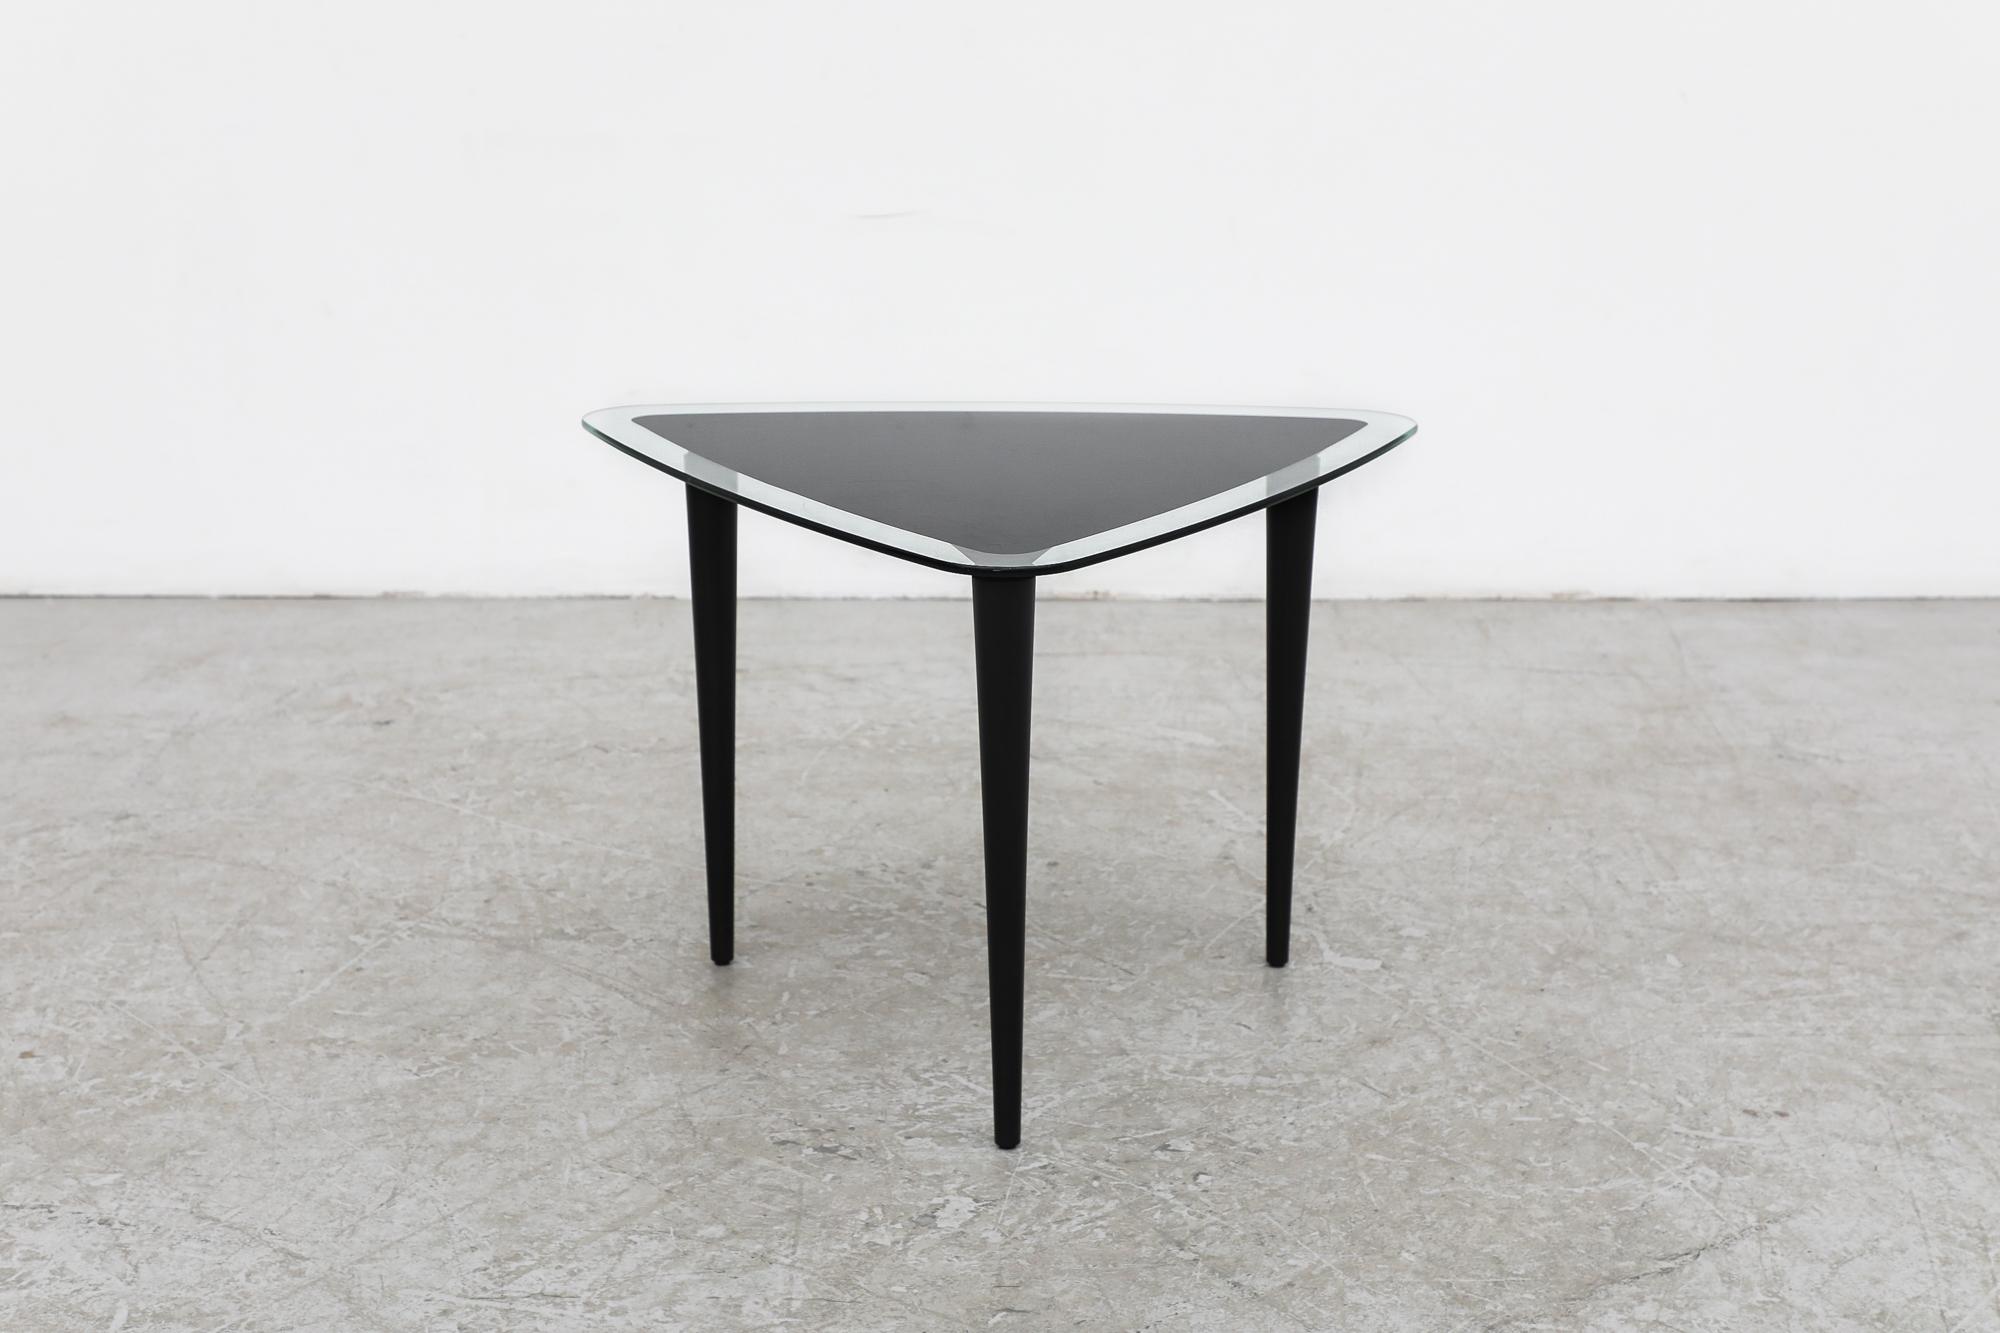 Mid-Century Modernist glass triangular side table with tapered legs. The top has a black printed triangle in the center of glass with clear glass boarder and three black tapered wood legs. In original condition with visible wear, including